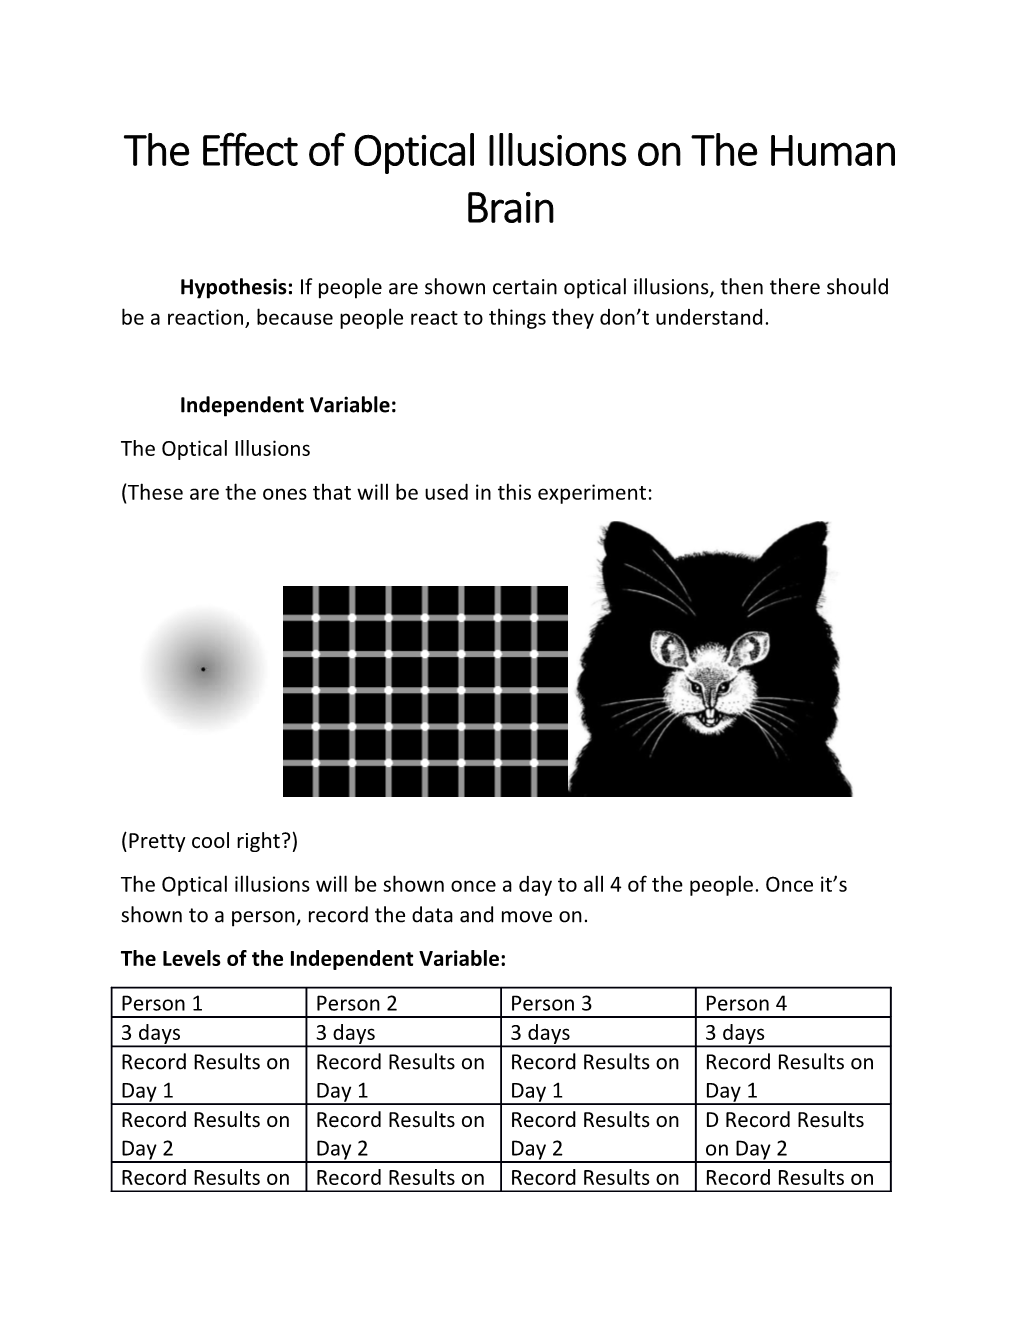 The Effect of Optical Illusions on the Human Brain